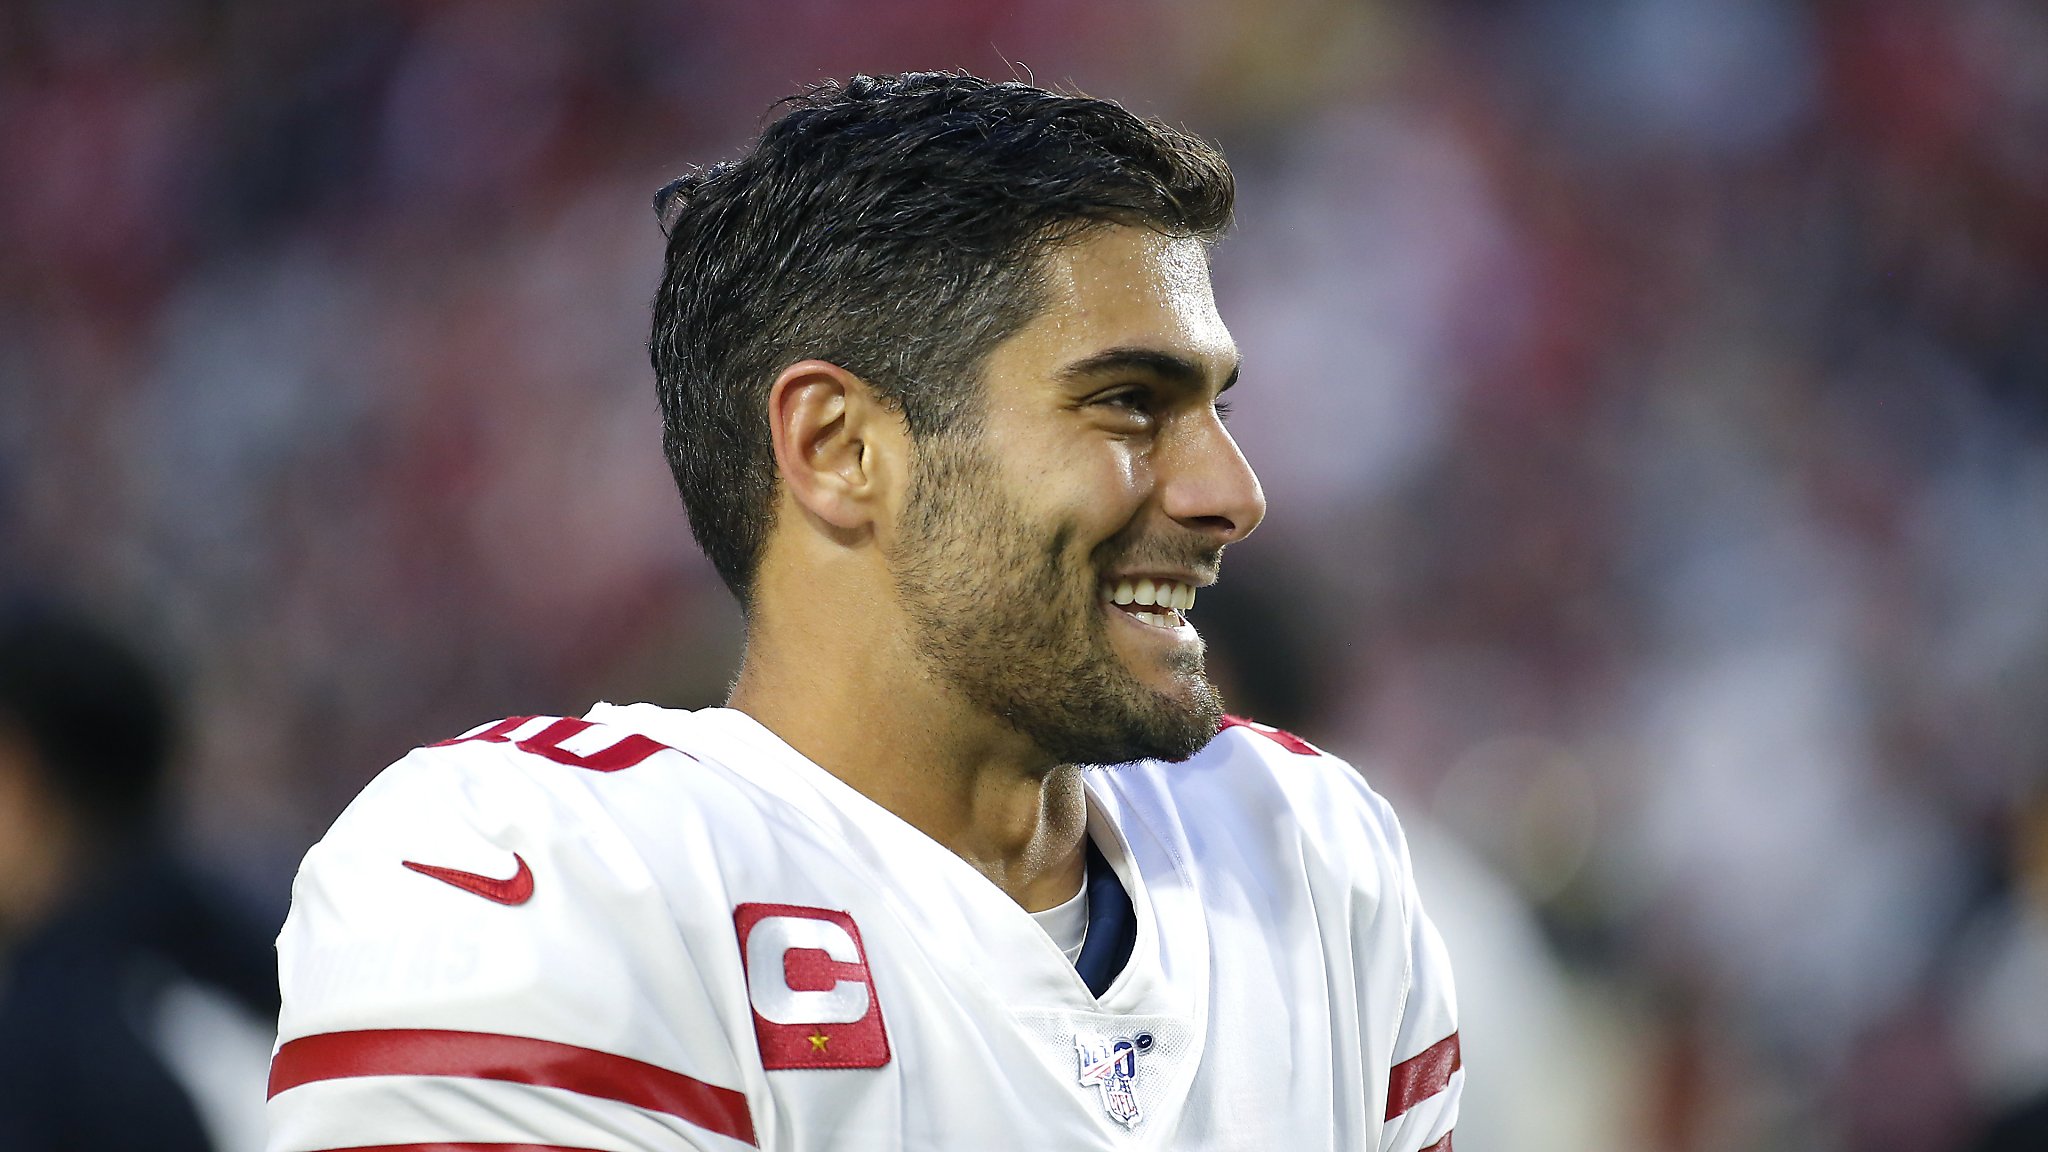 Oh, baby: Jimmy Garoppolo addresses Erin Andrews interview